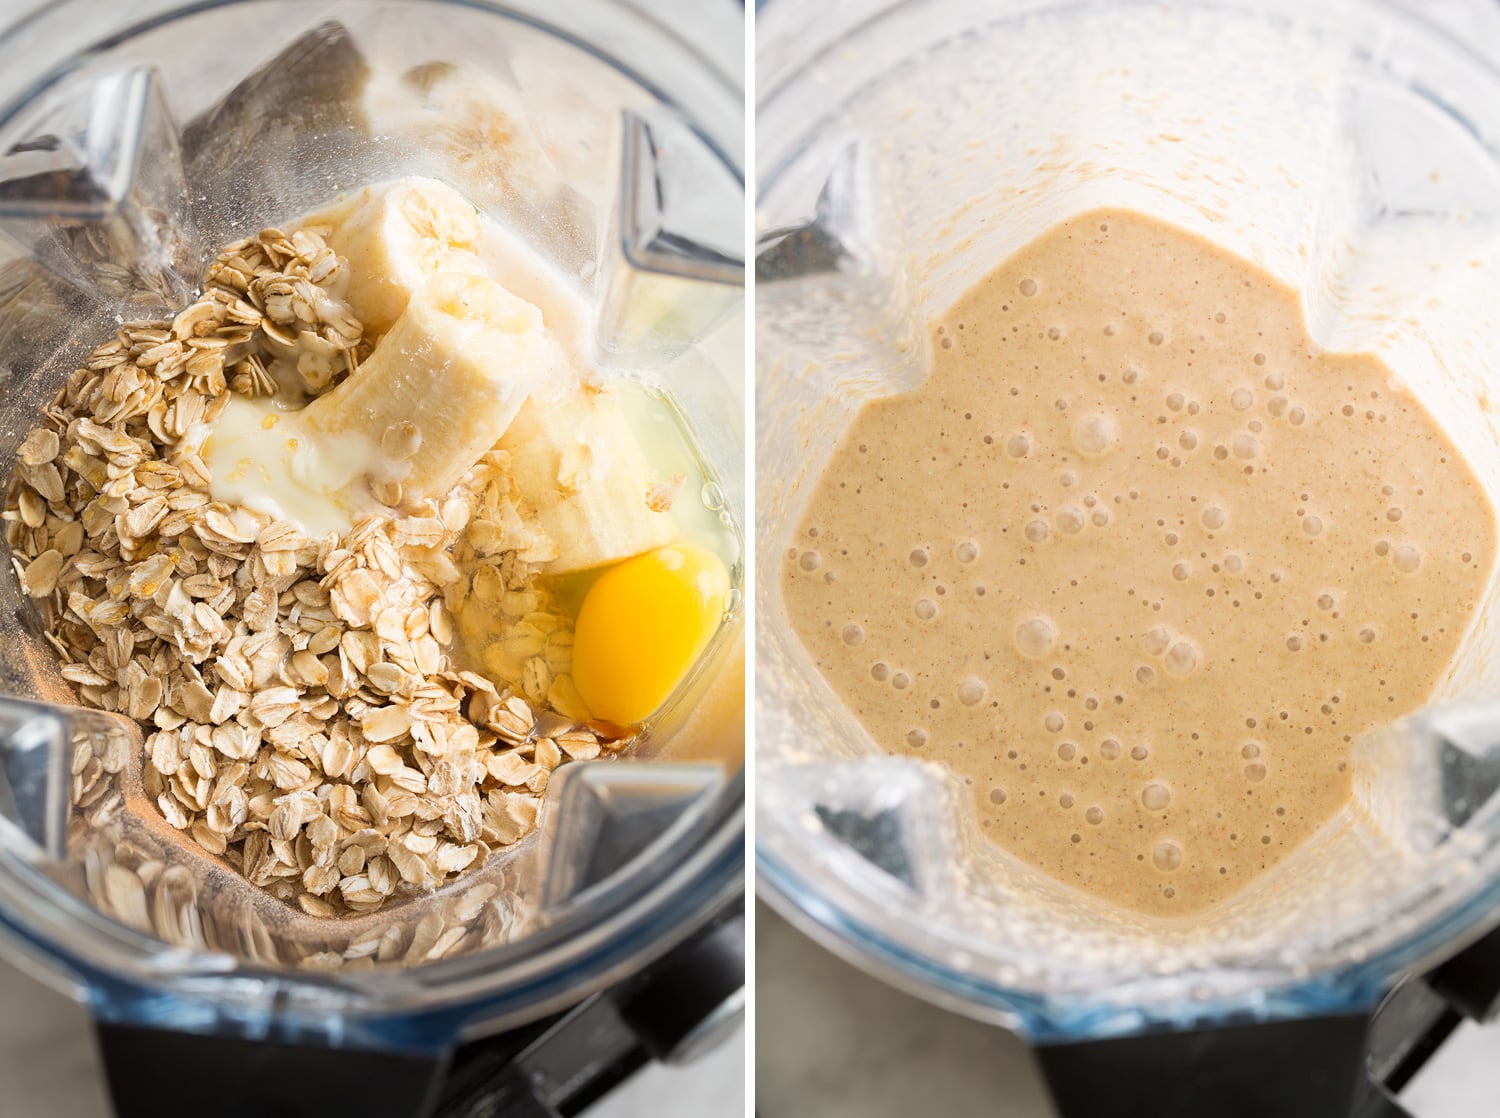 Oat mixture shown in blender before and after mixing.